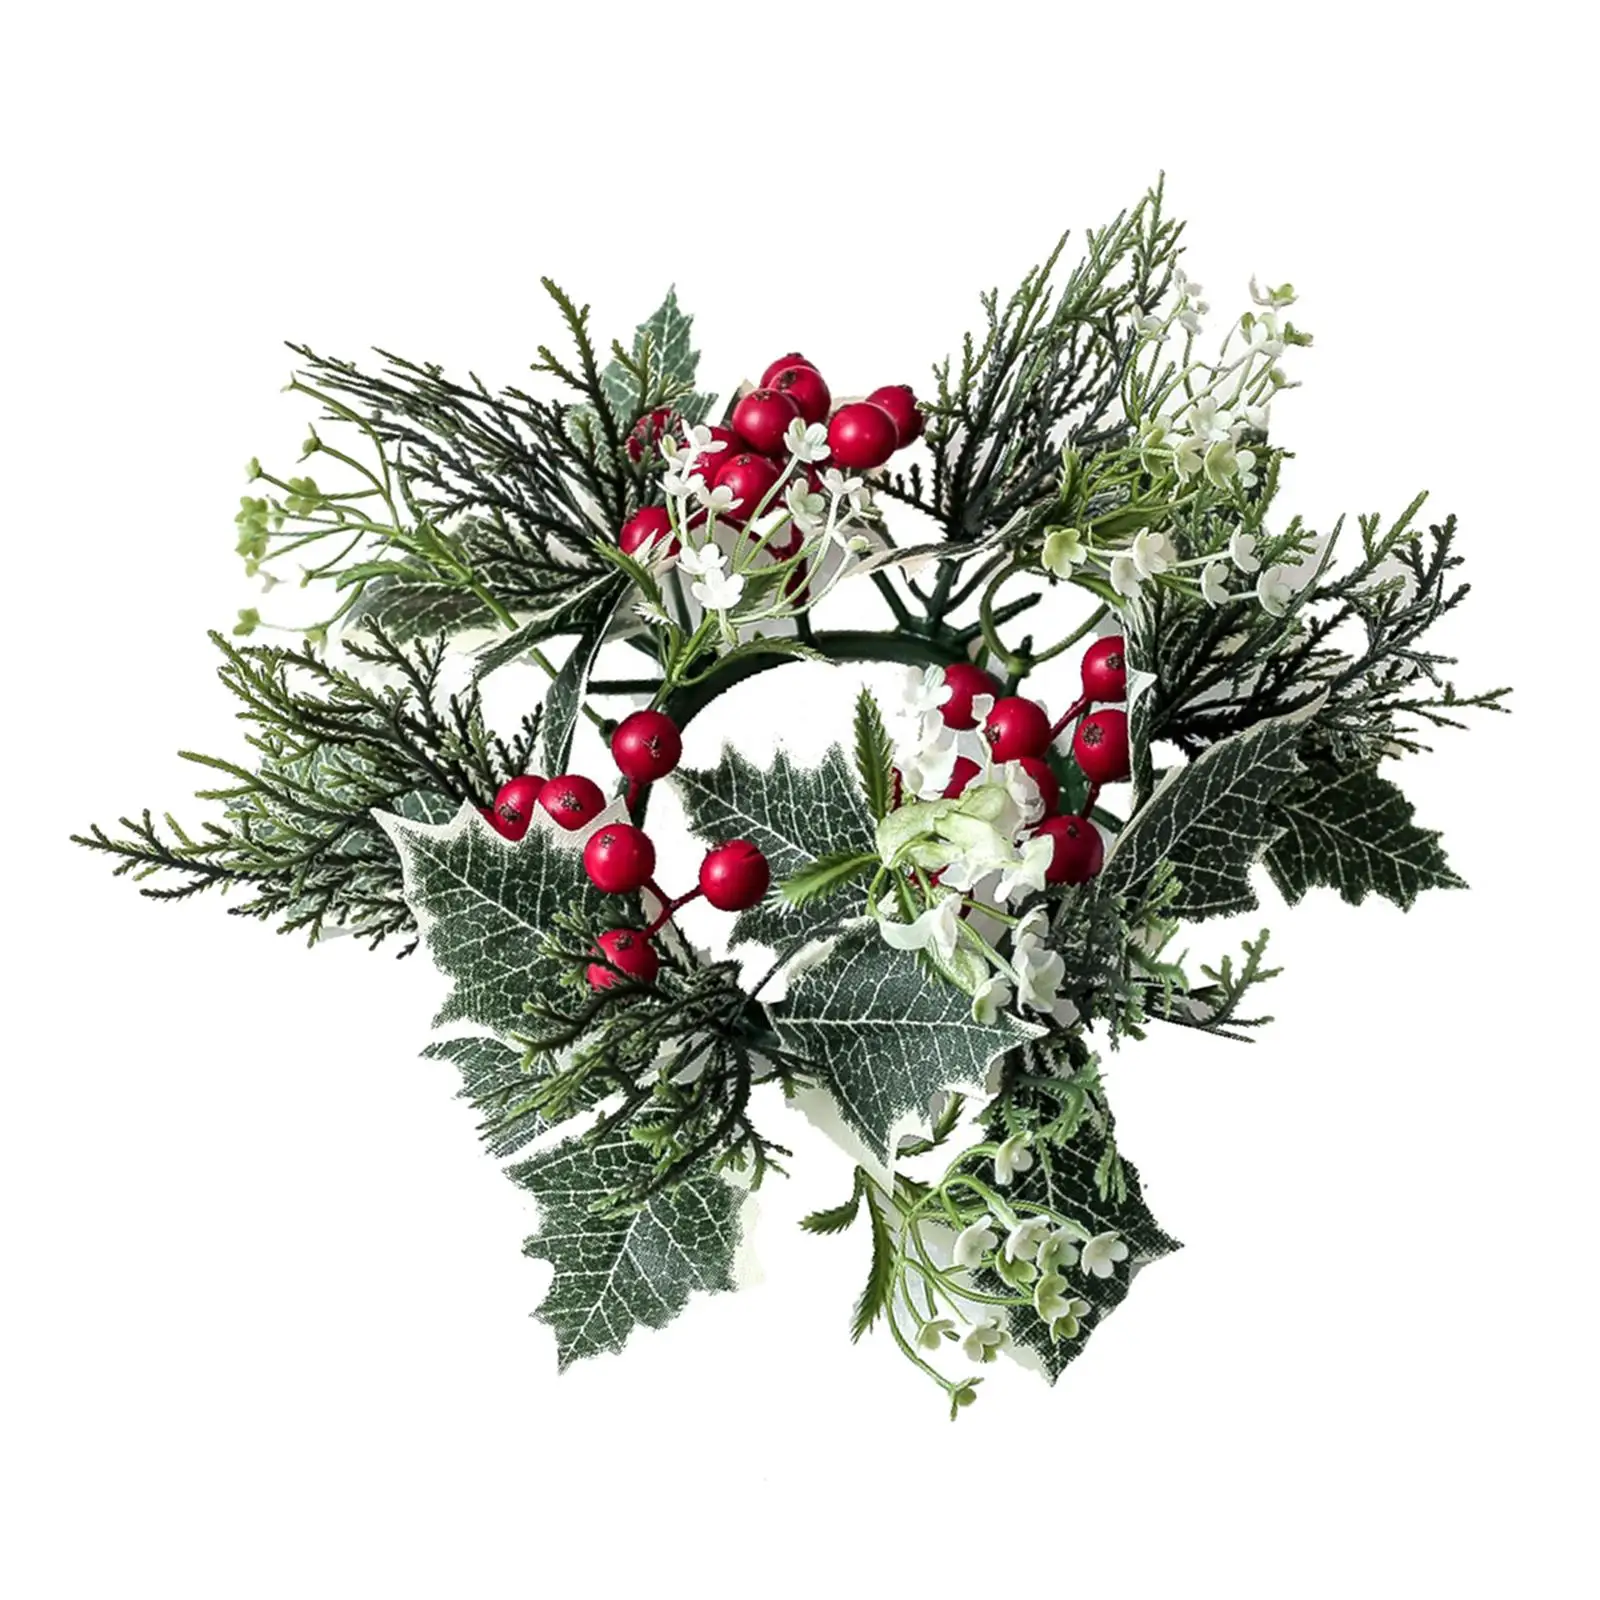 Candle Rings Wreath Christmas Candle Rings Garland for Wedding, Party, Home